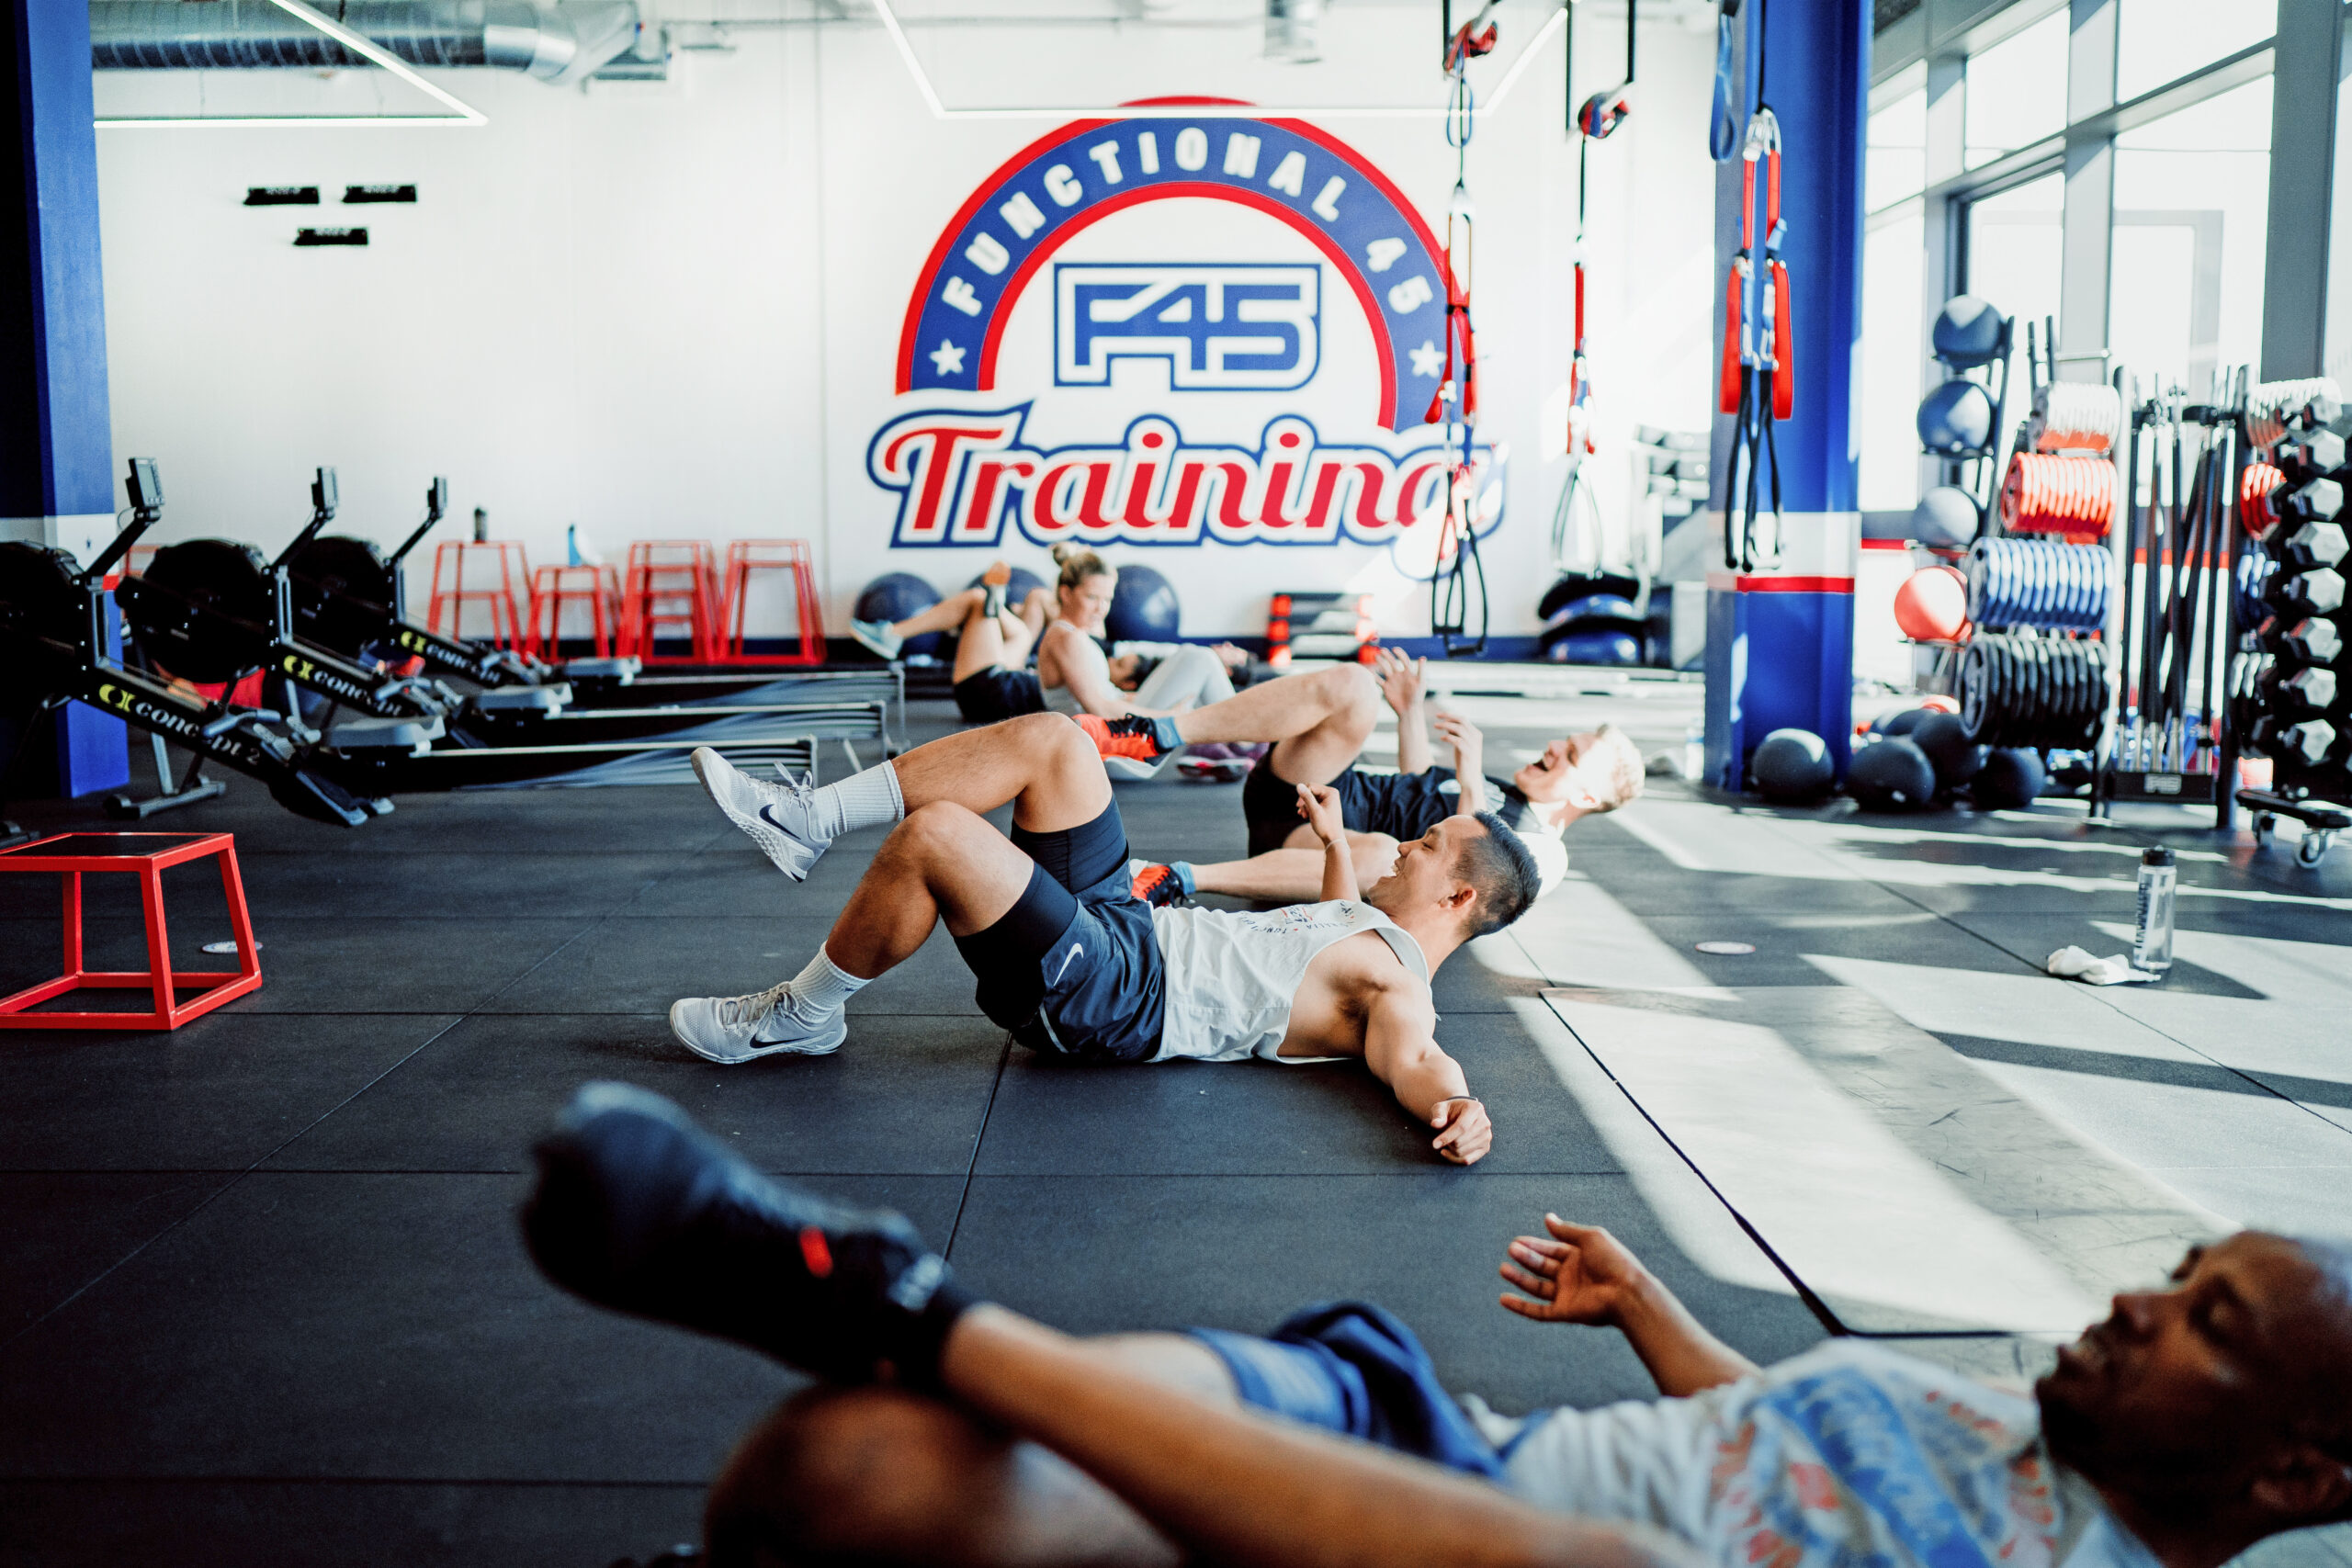 Implementing recovery into your Challenge routine | F45 Training